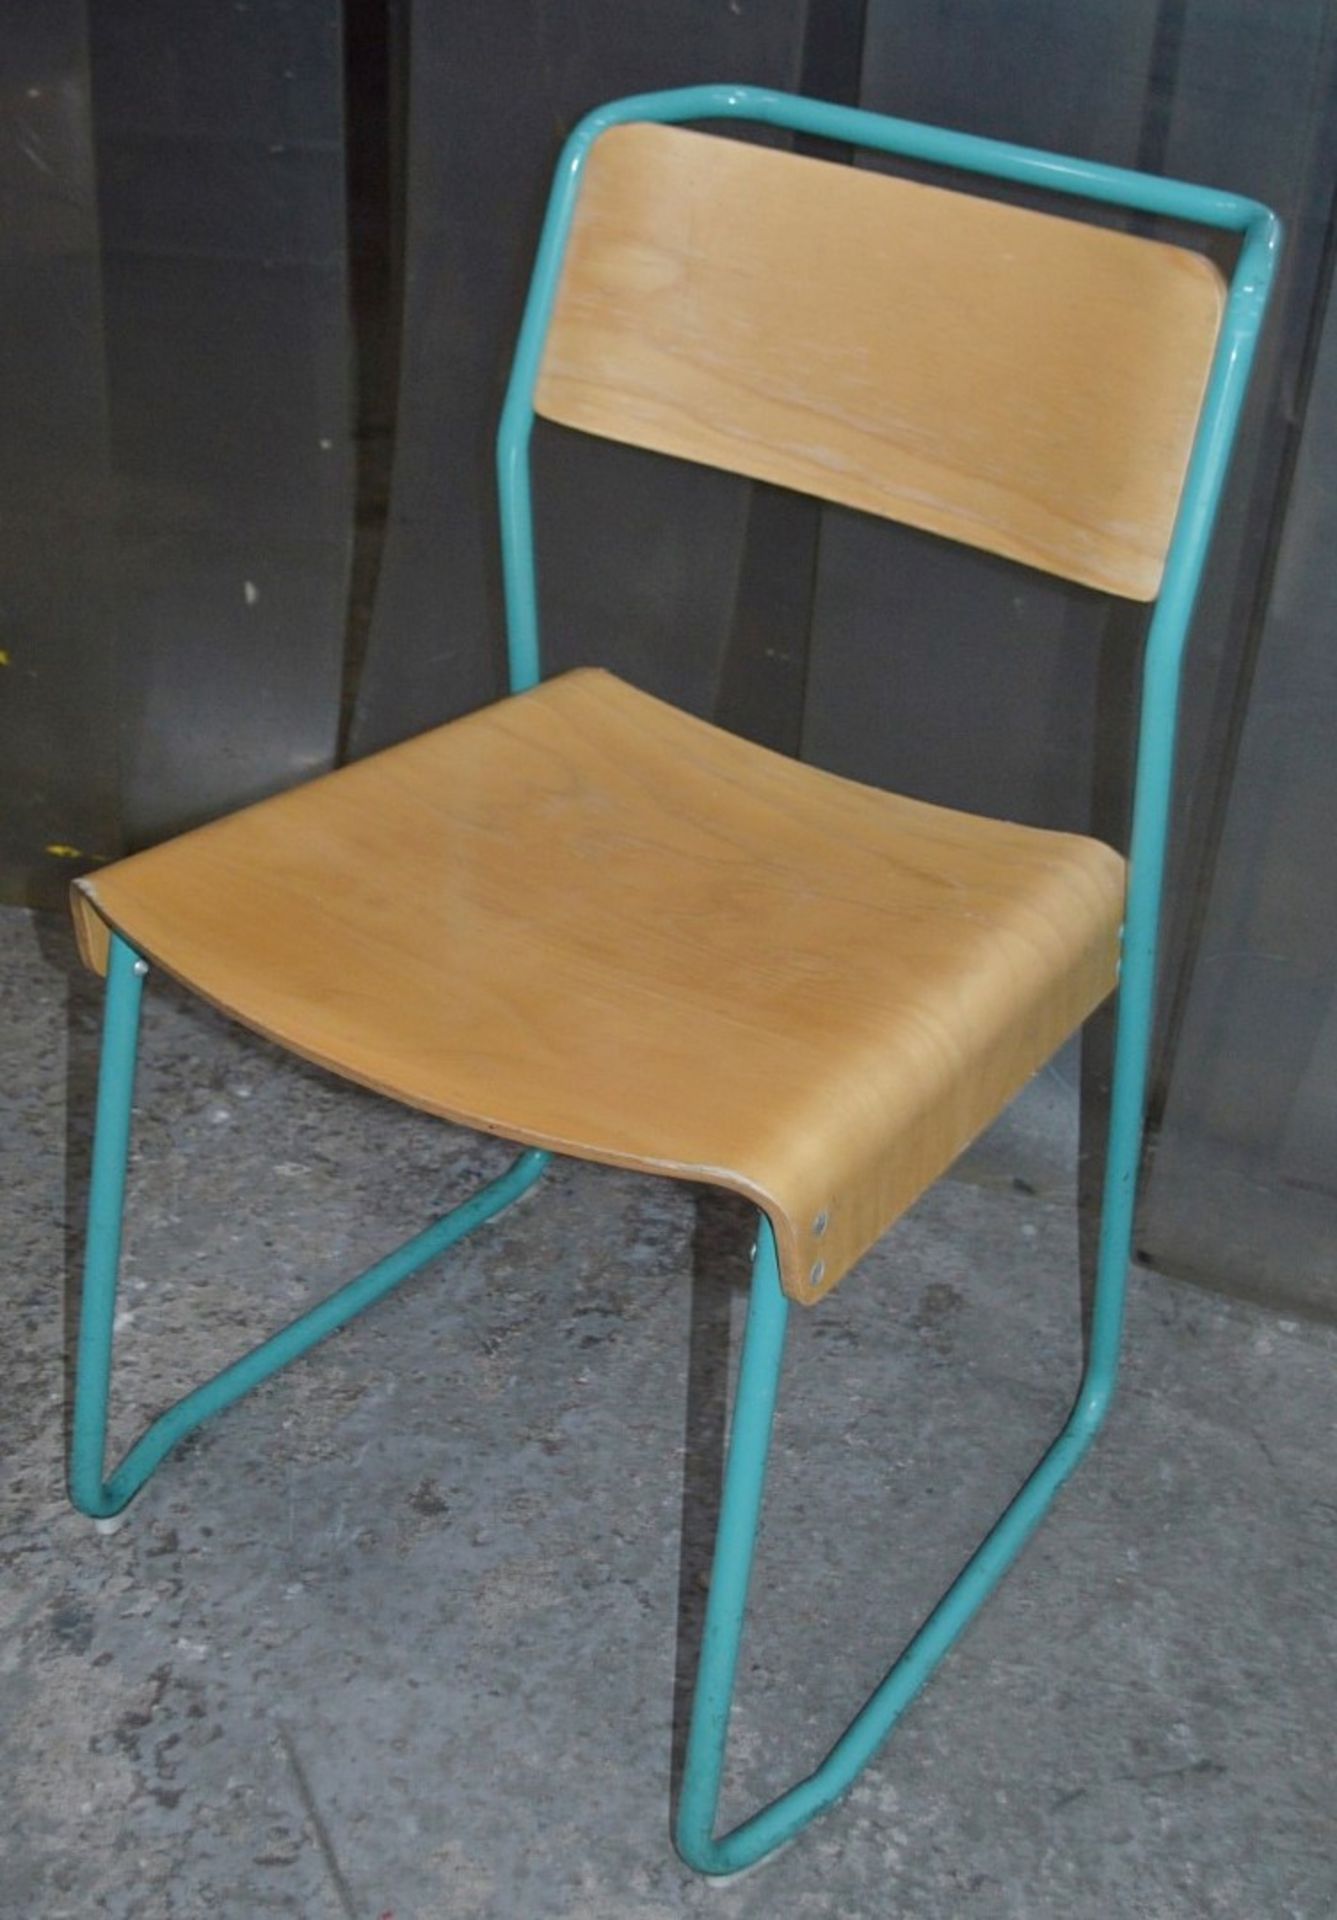 12 x Contemporary Stackable Bistro / Bar Chairs With Metal Frames In Teal With Curved Vanished - Image 7 of 11